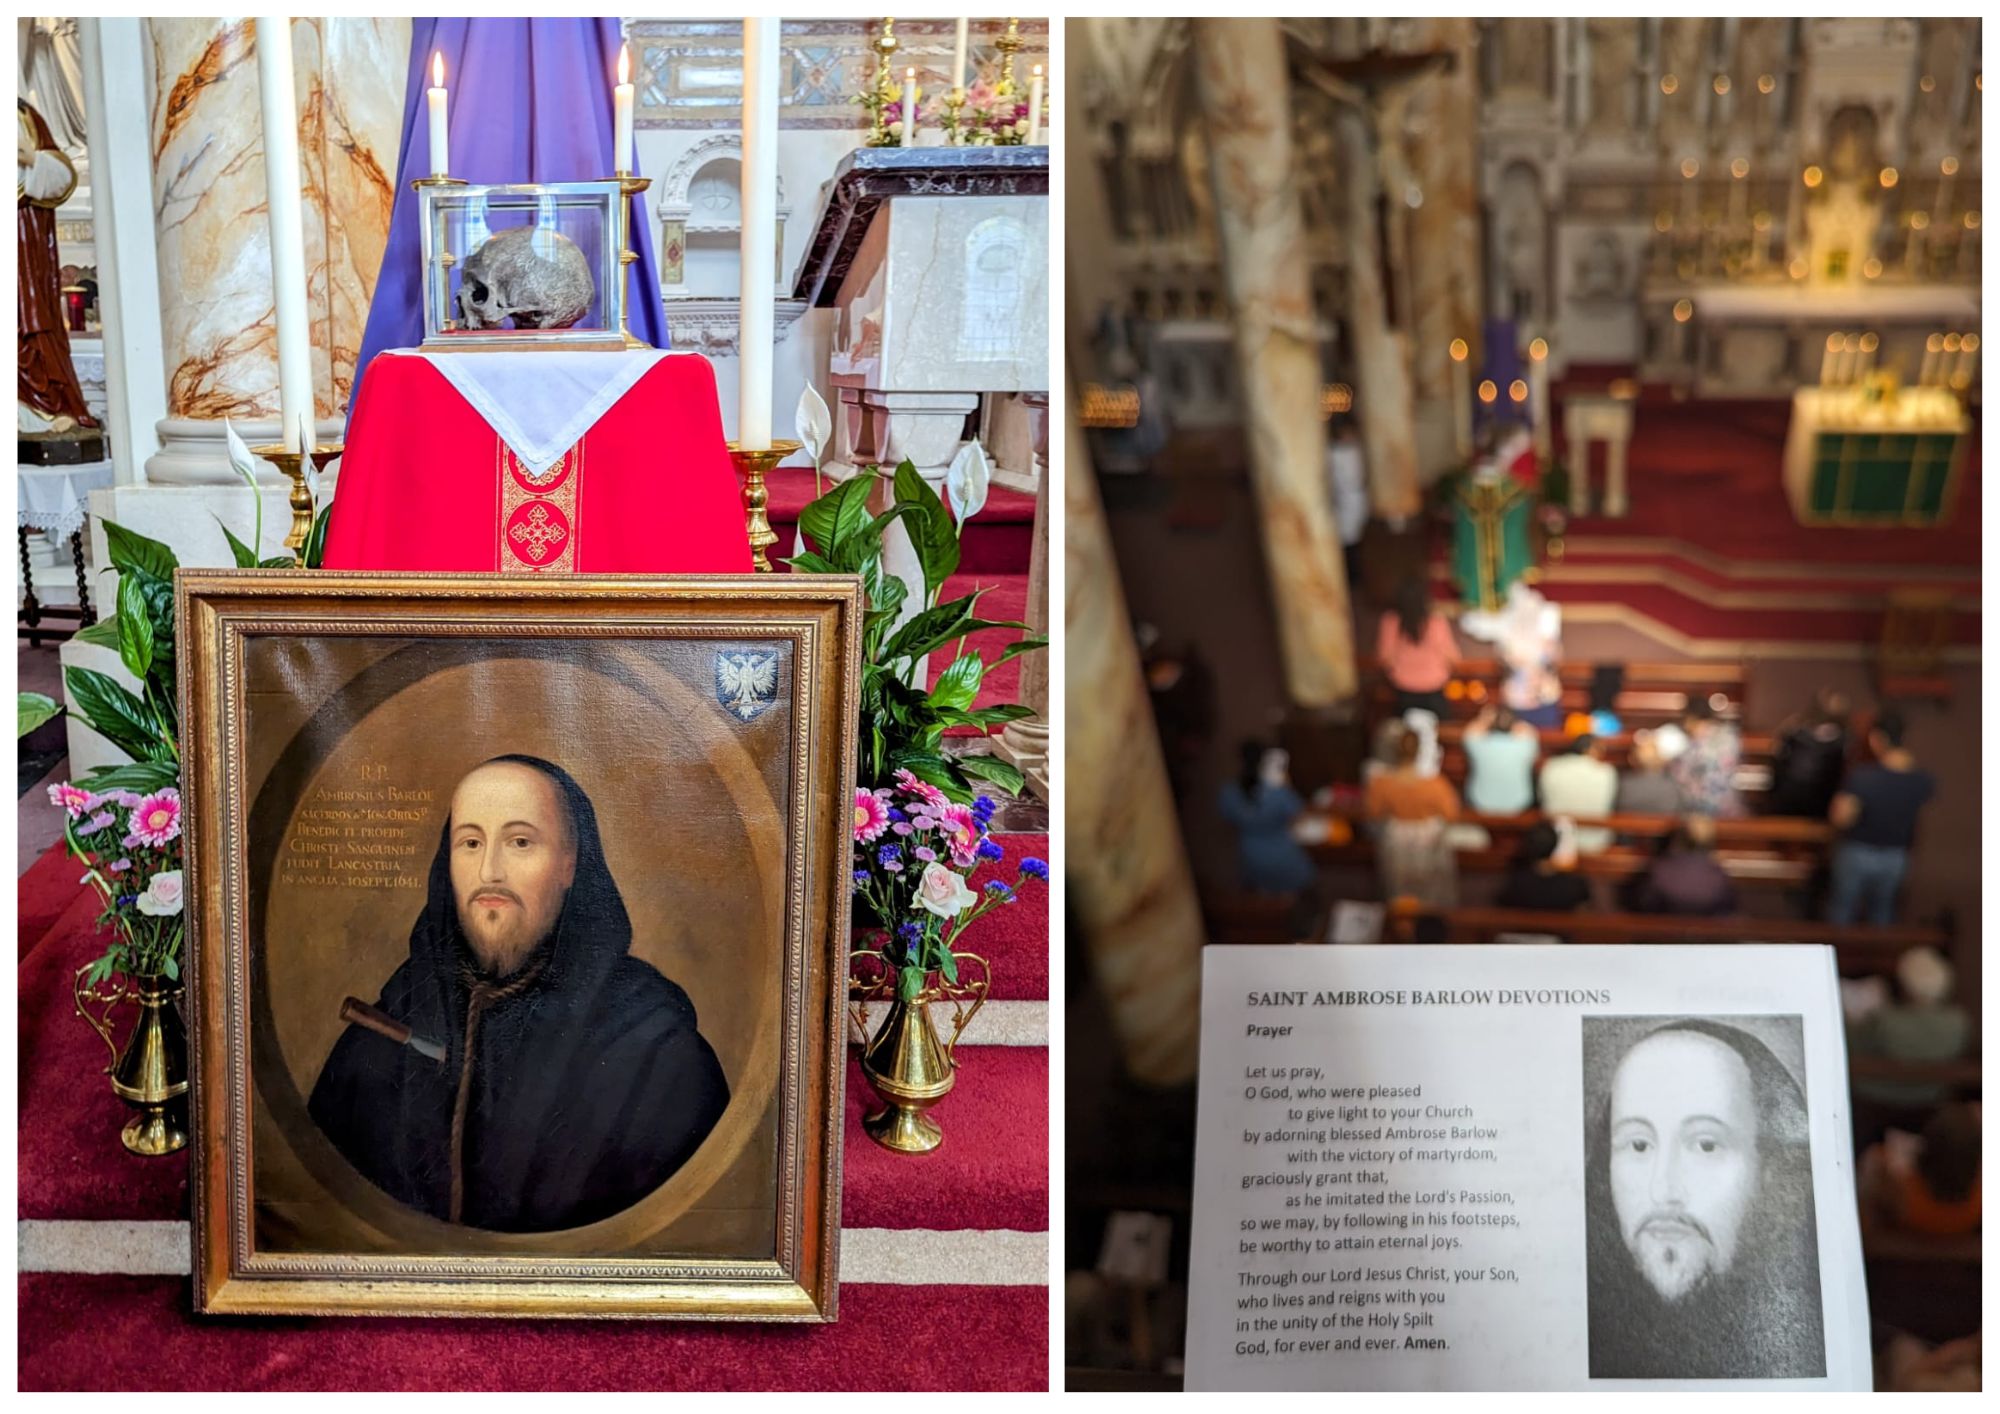 Two photos depicting the skull of St Ambrose above his portrait, and a photo of the Mass sheet taken from the choir loft overlooking the congregation